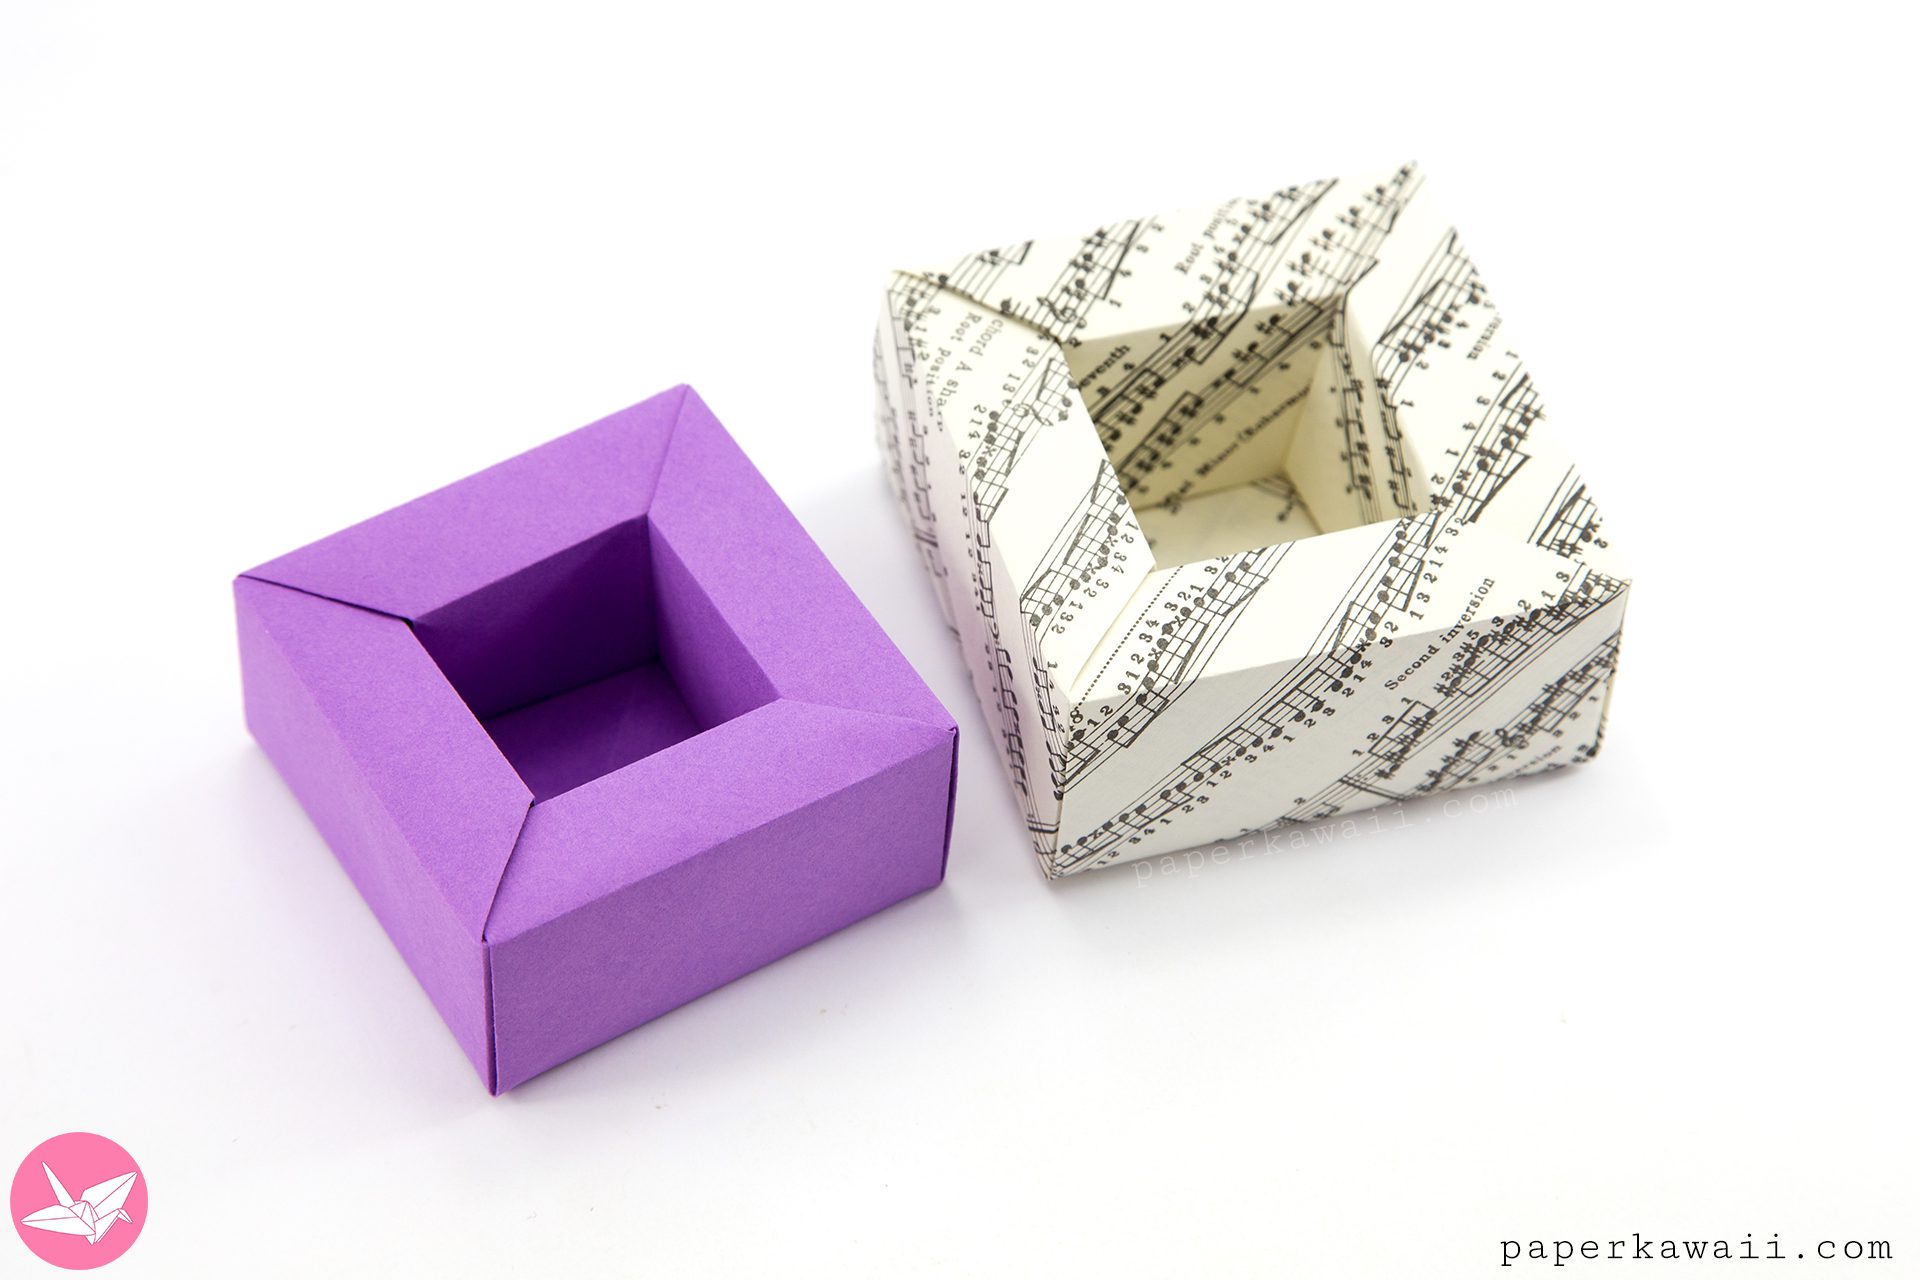 How to make a wide rimmed origami planter pot or box. Made with 1 sheet of square paper, no glue required. Great as a plant pot for origami plants & flowers.